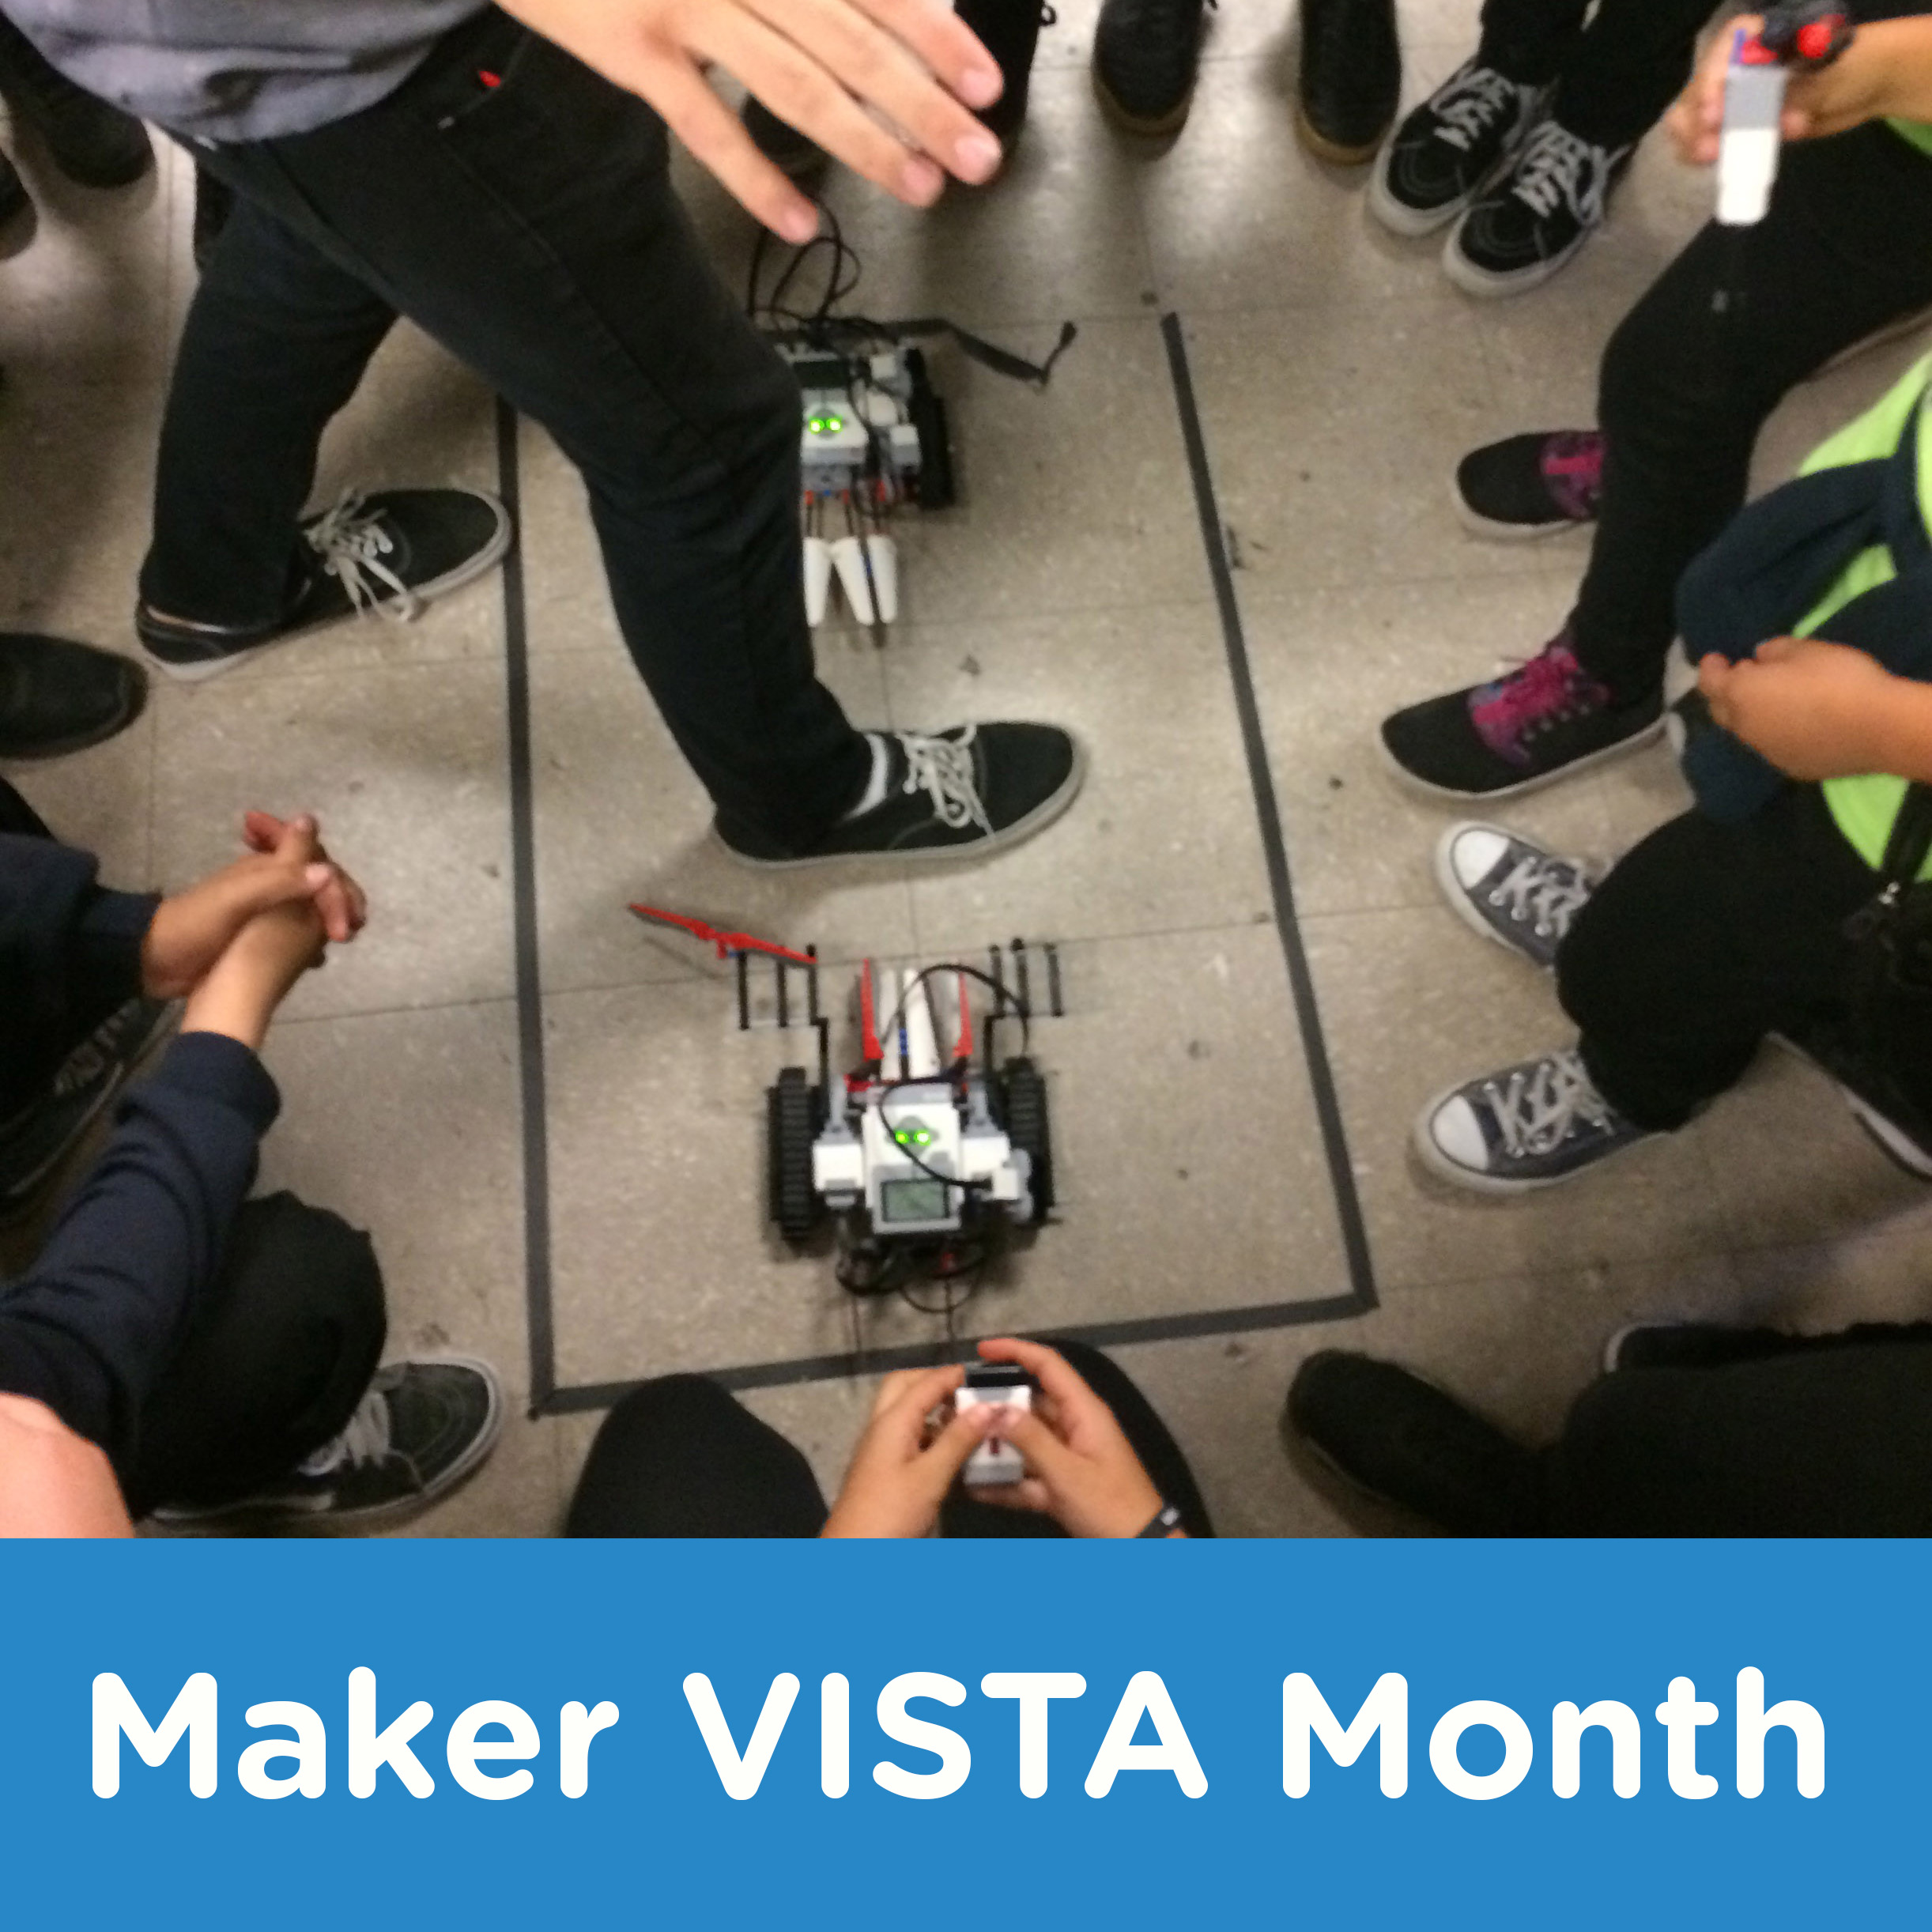 Building Capacity and Connections at Bethune Middle School Through Maker VISTA